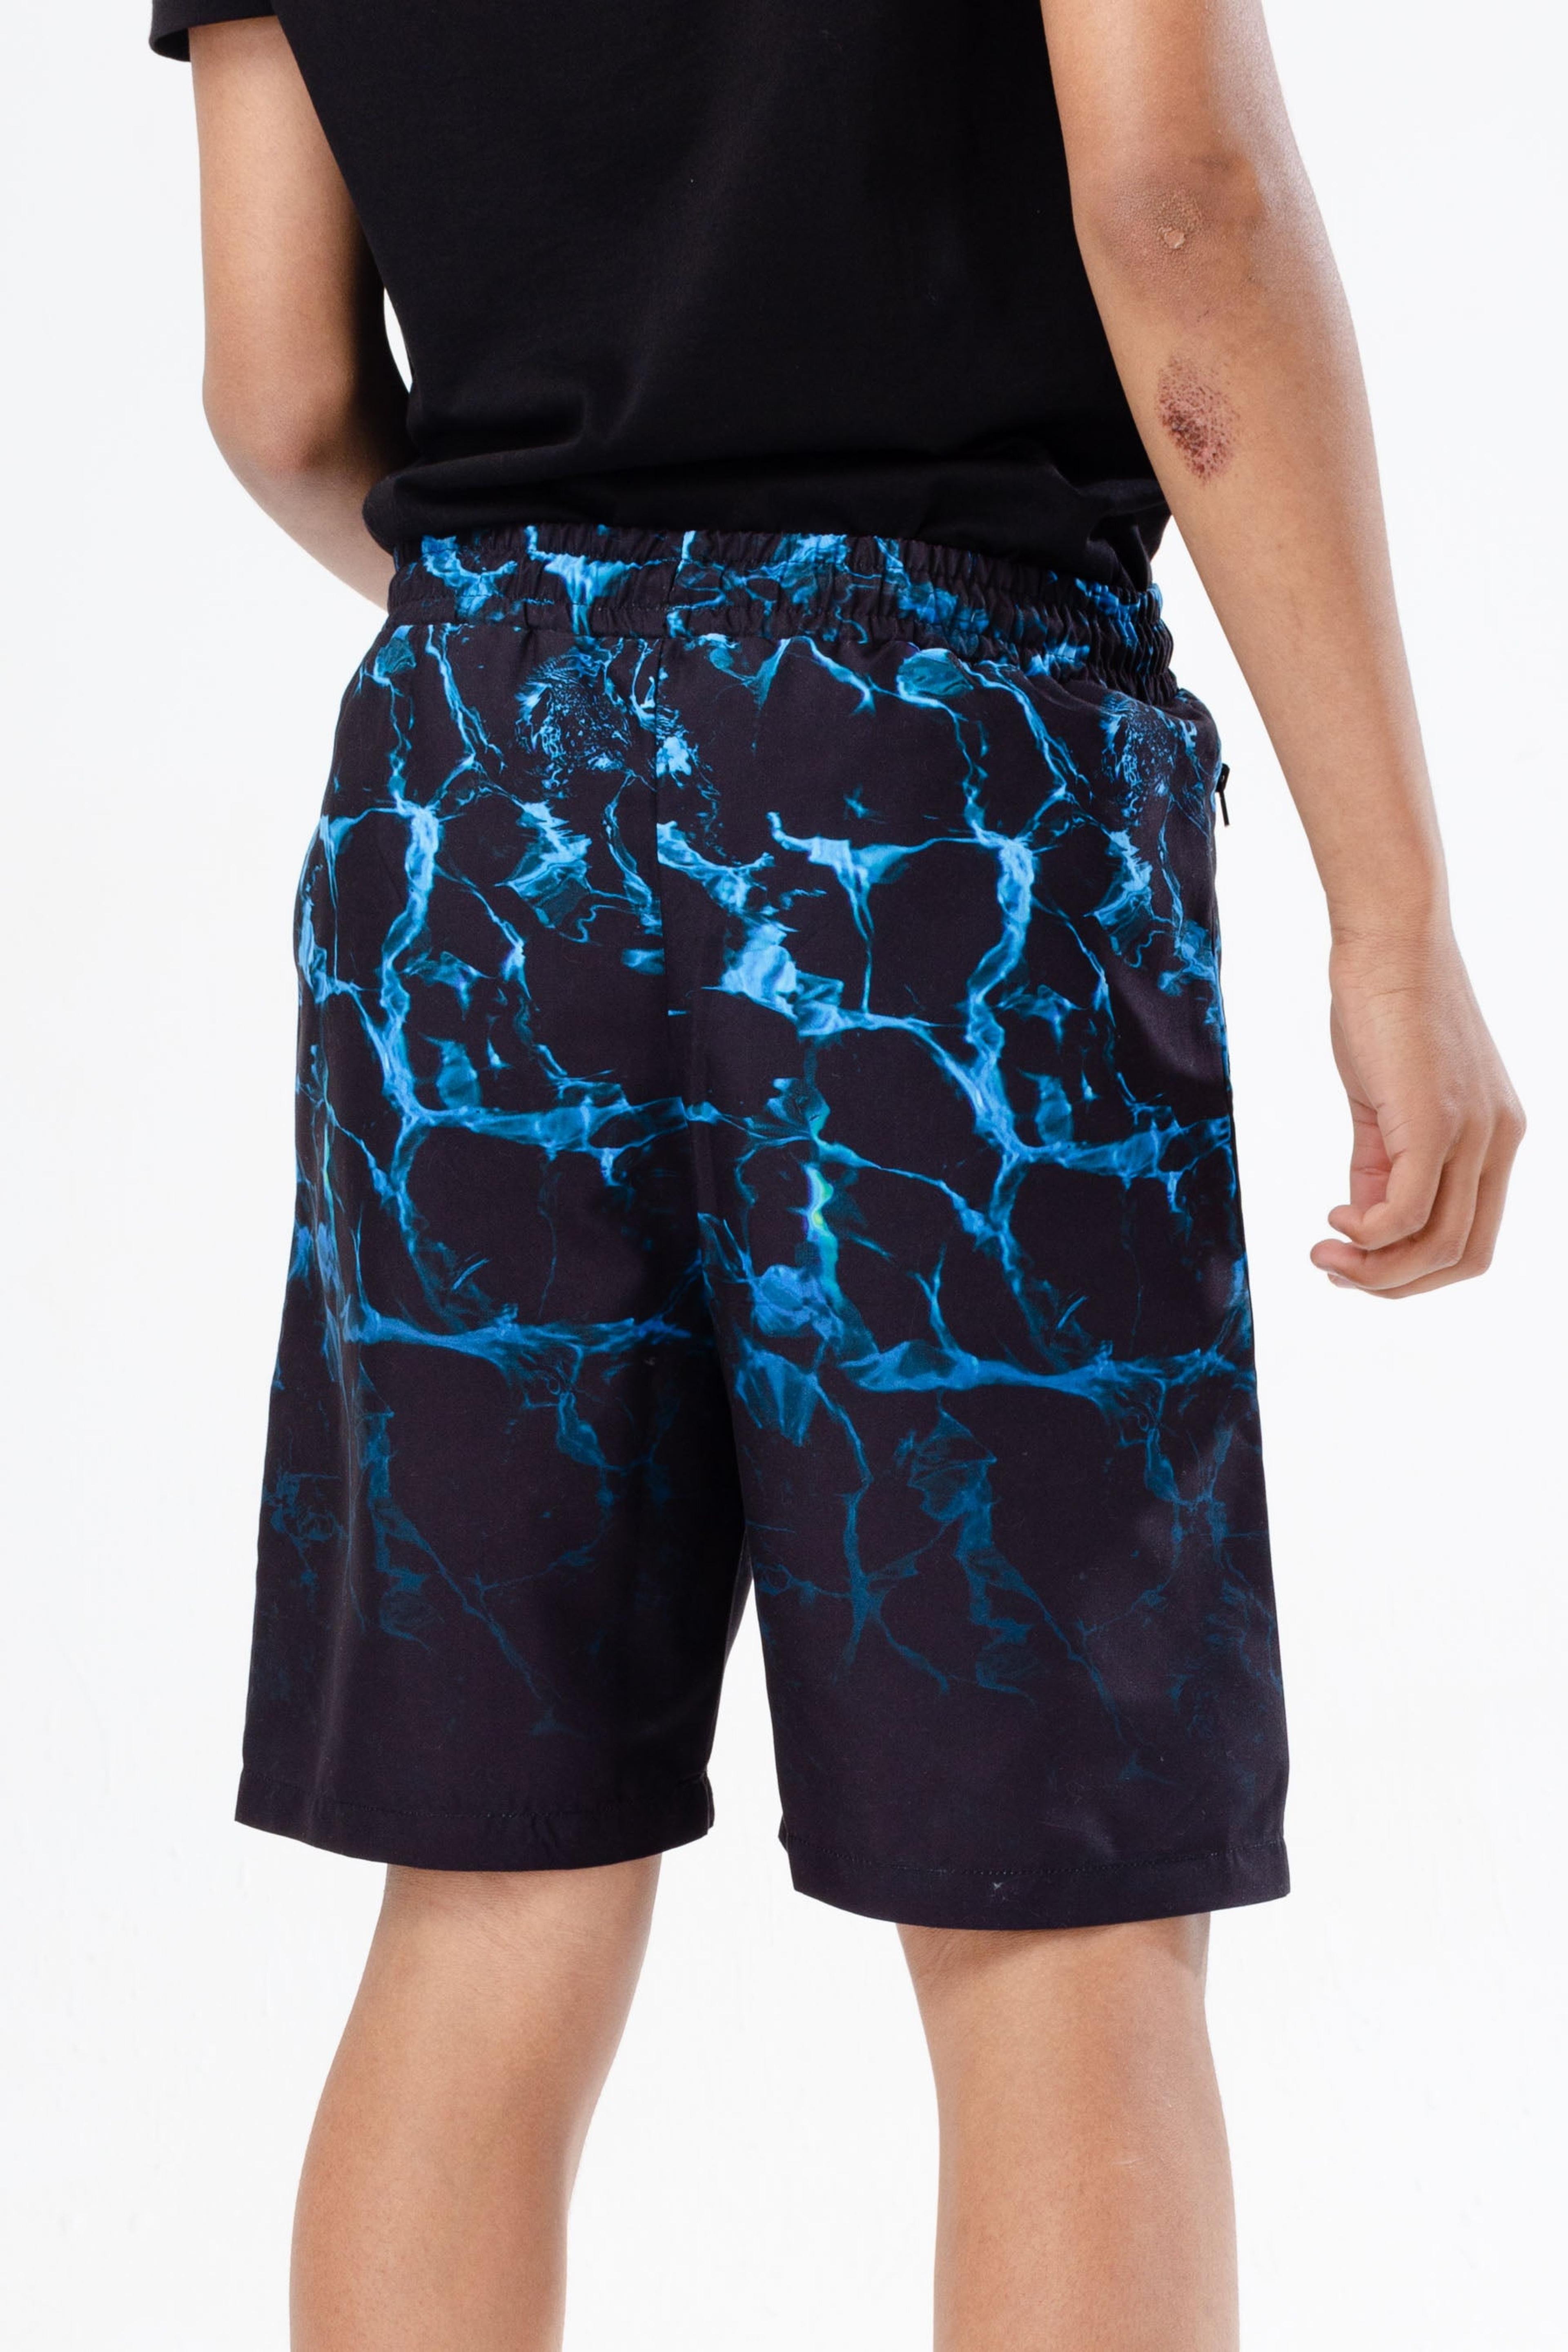 Alternate View 1 of HYPE BOYS MARBLE LUXE BOARD SHORTS